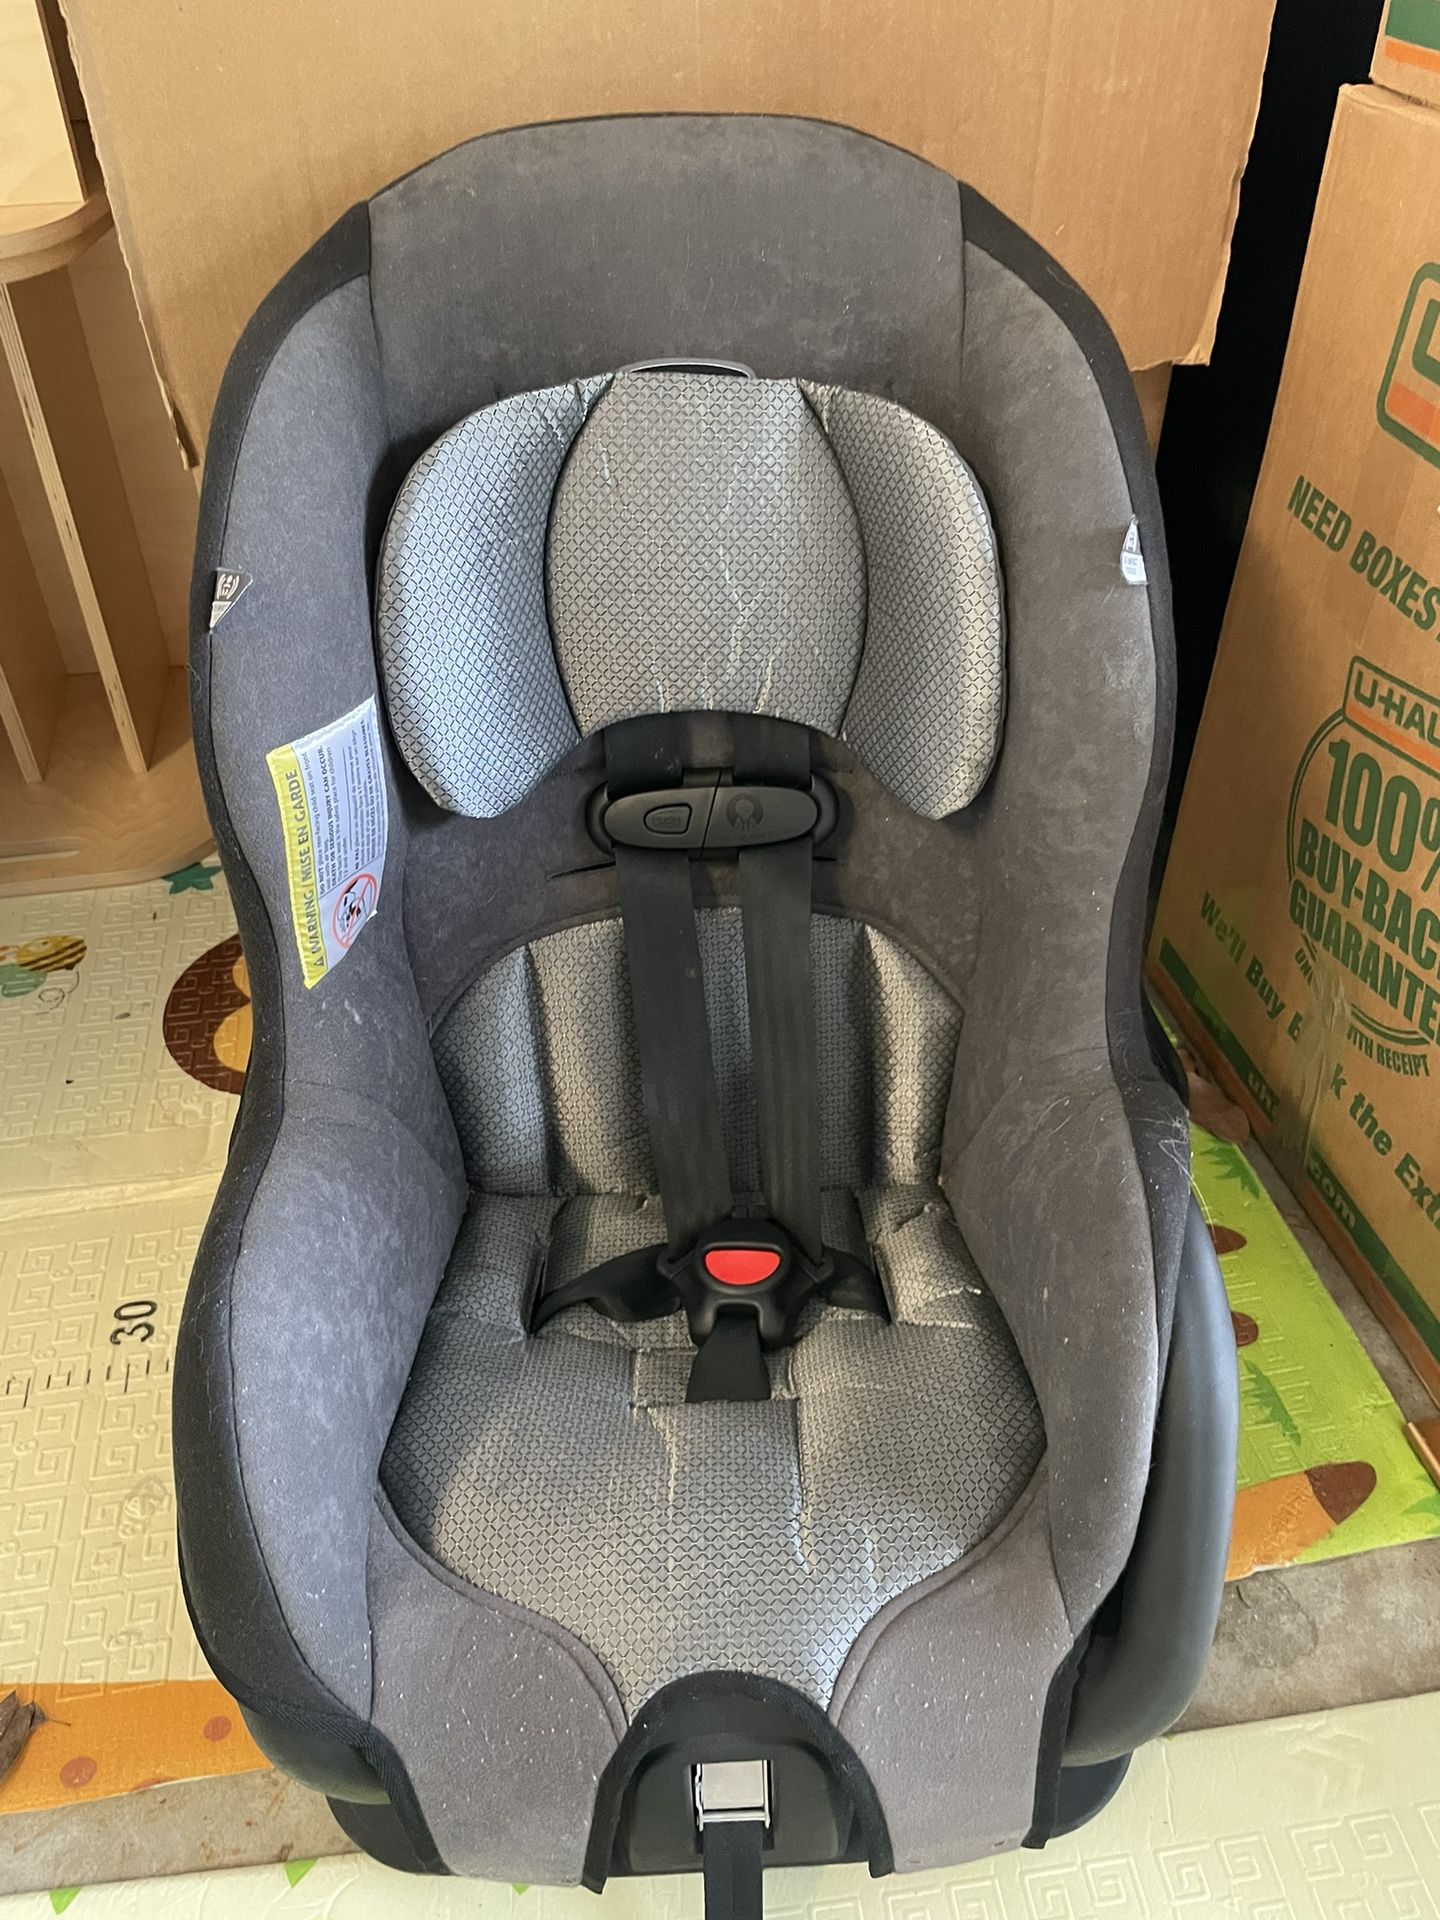 Evenflo Tribute 5 Convertible Car Seat, 2-in-1, Saturn Gray - Good Cond 